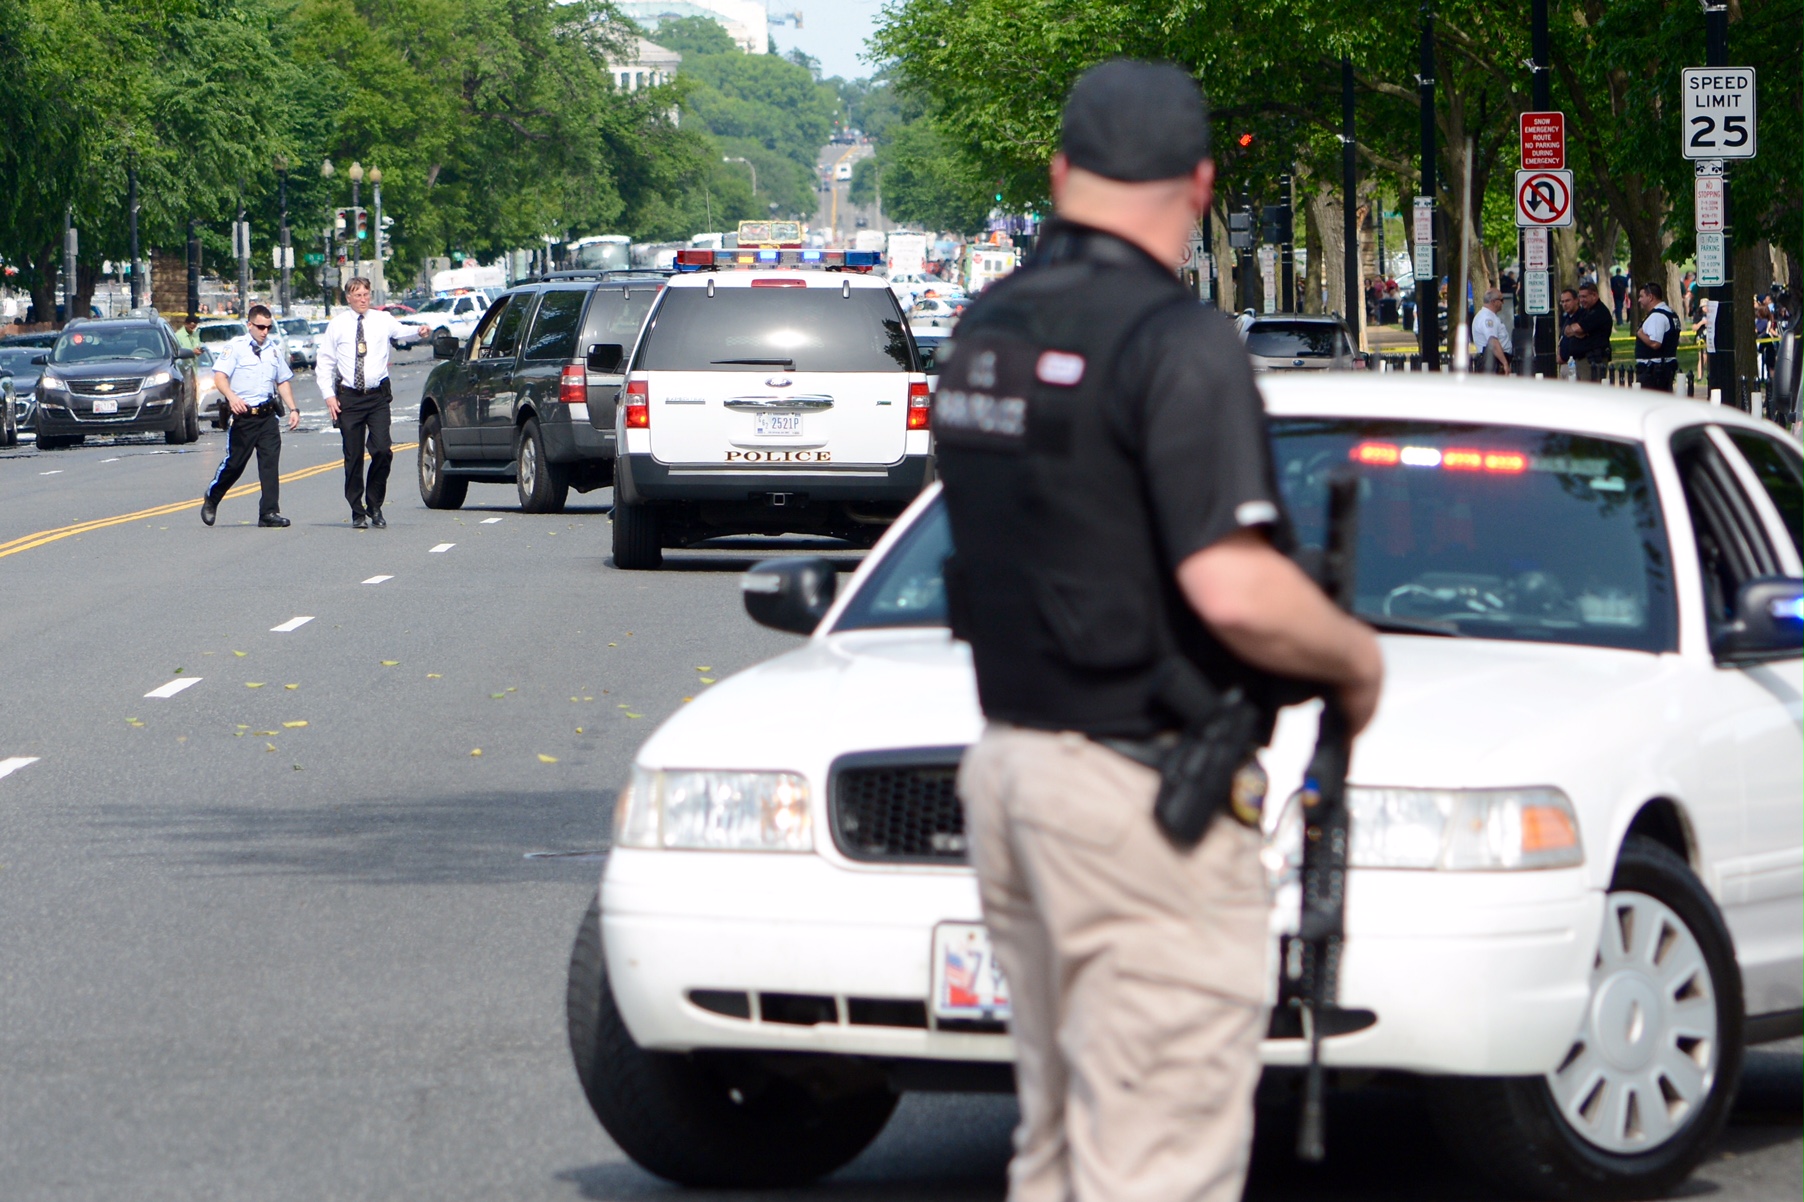 U.S. Park Police were among the agencies at the scene following a shooting near the White House Friday. (WTOP/Dave Dildine)